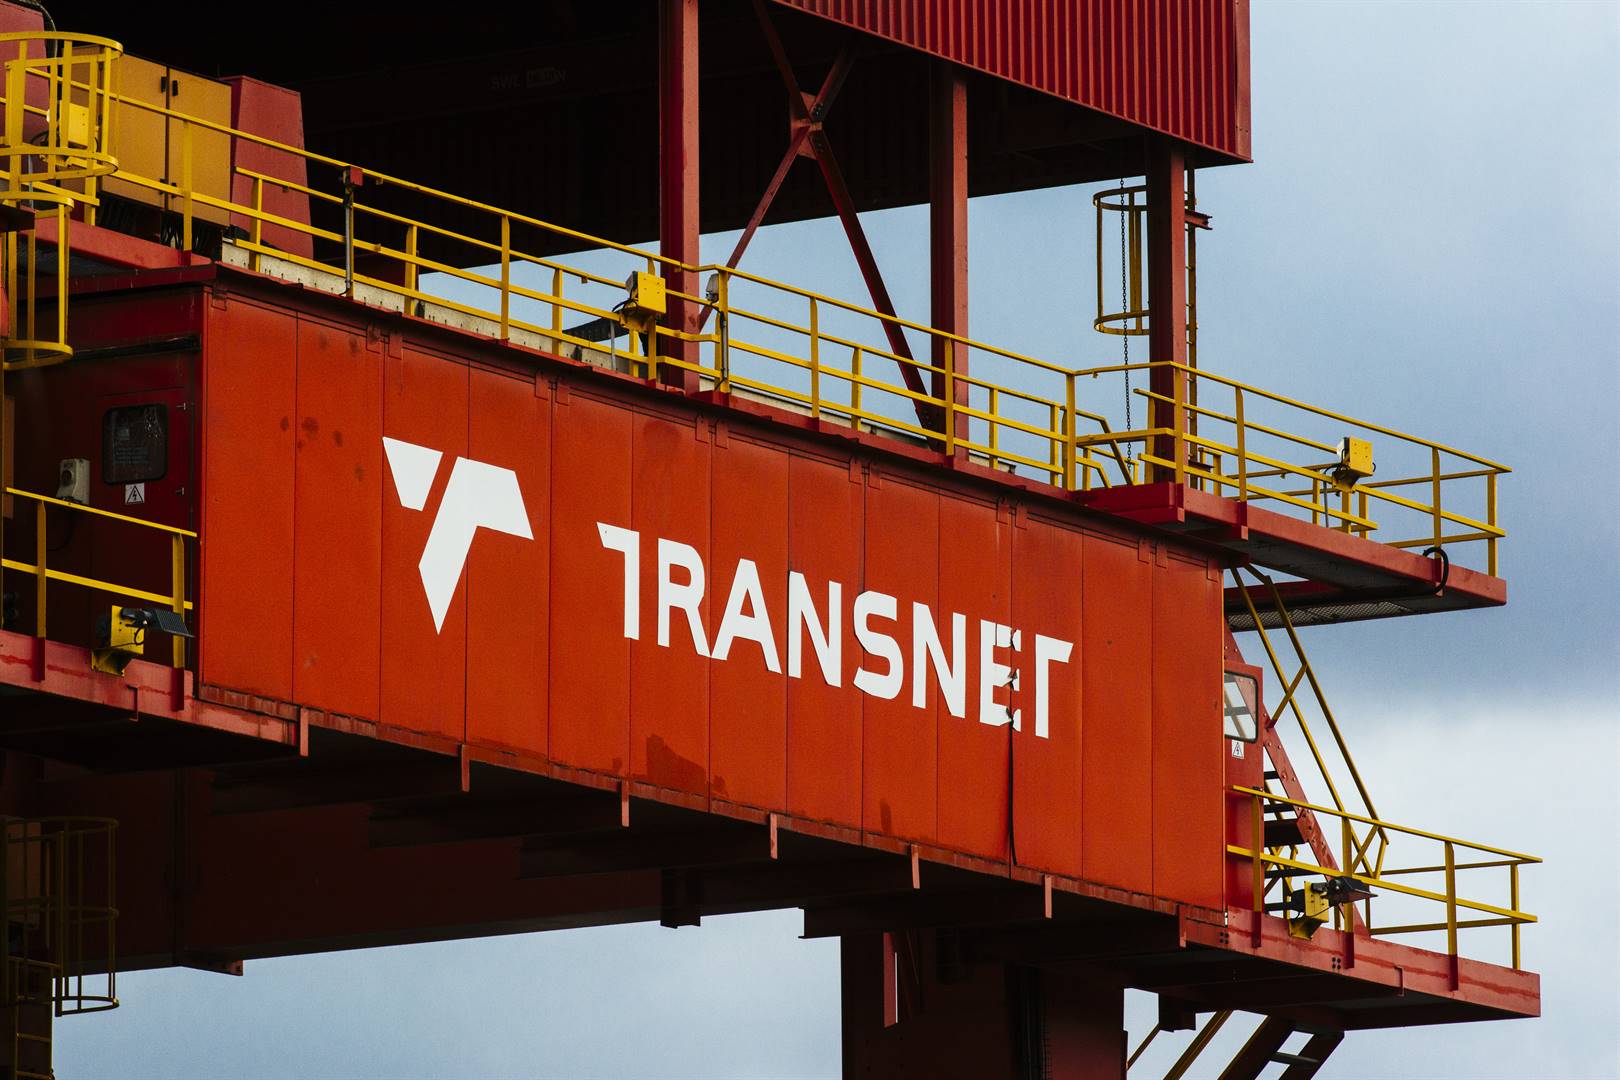 A R100 billion turnaround plan for Transnet has been proposed by its board.